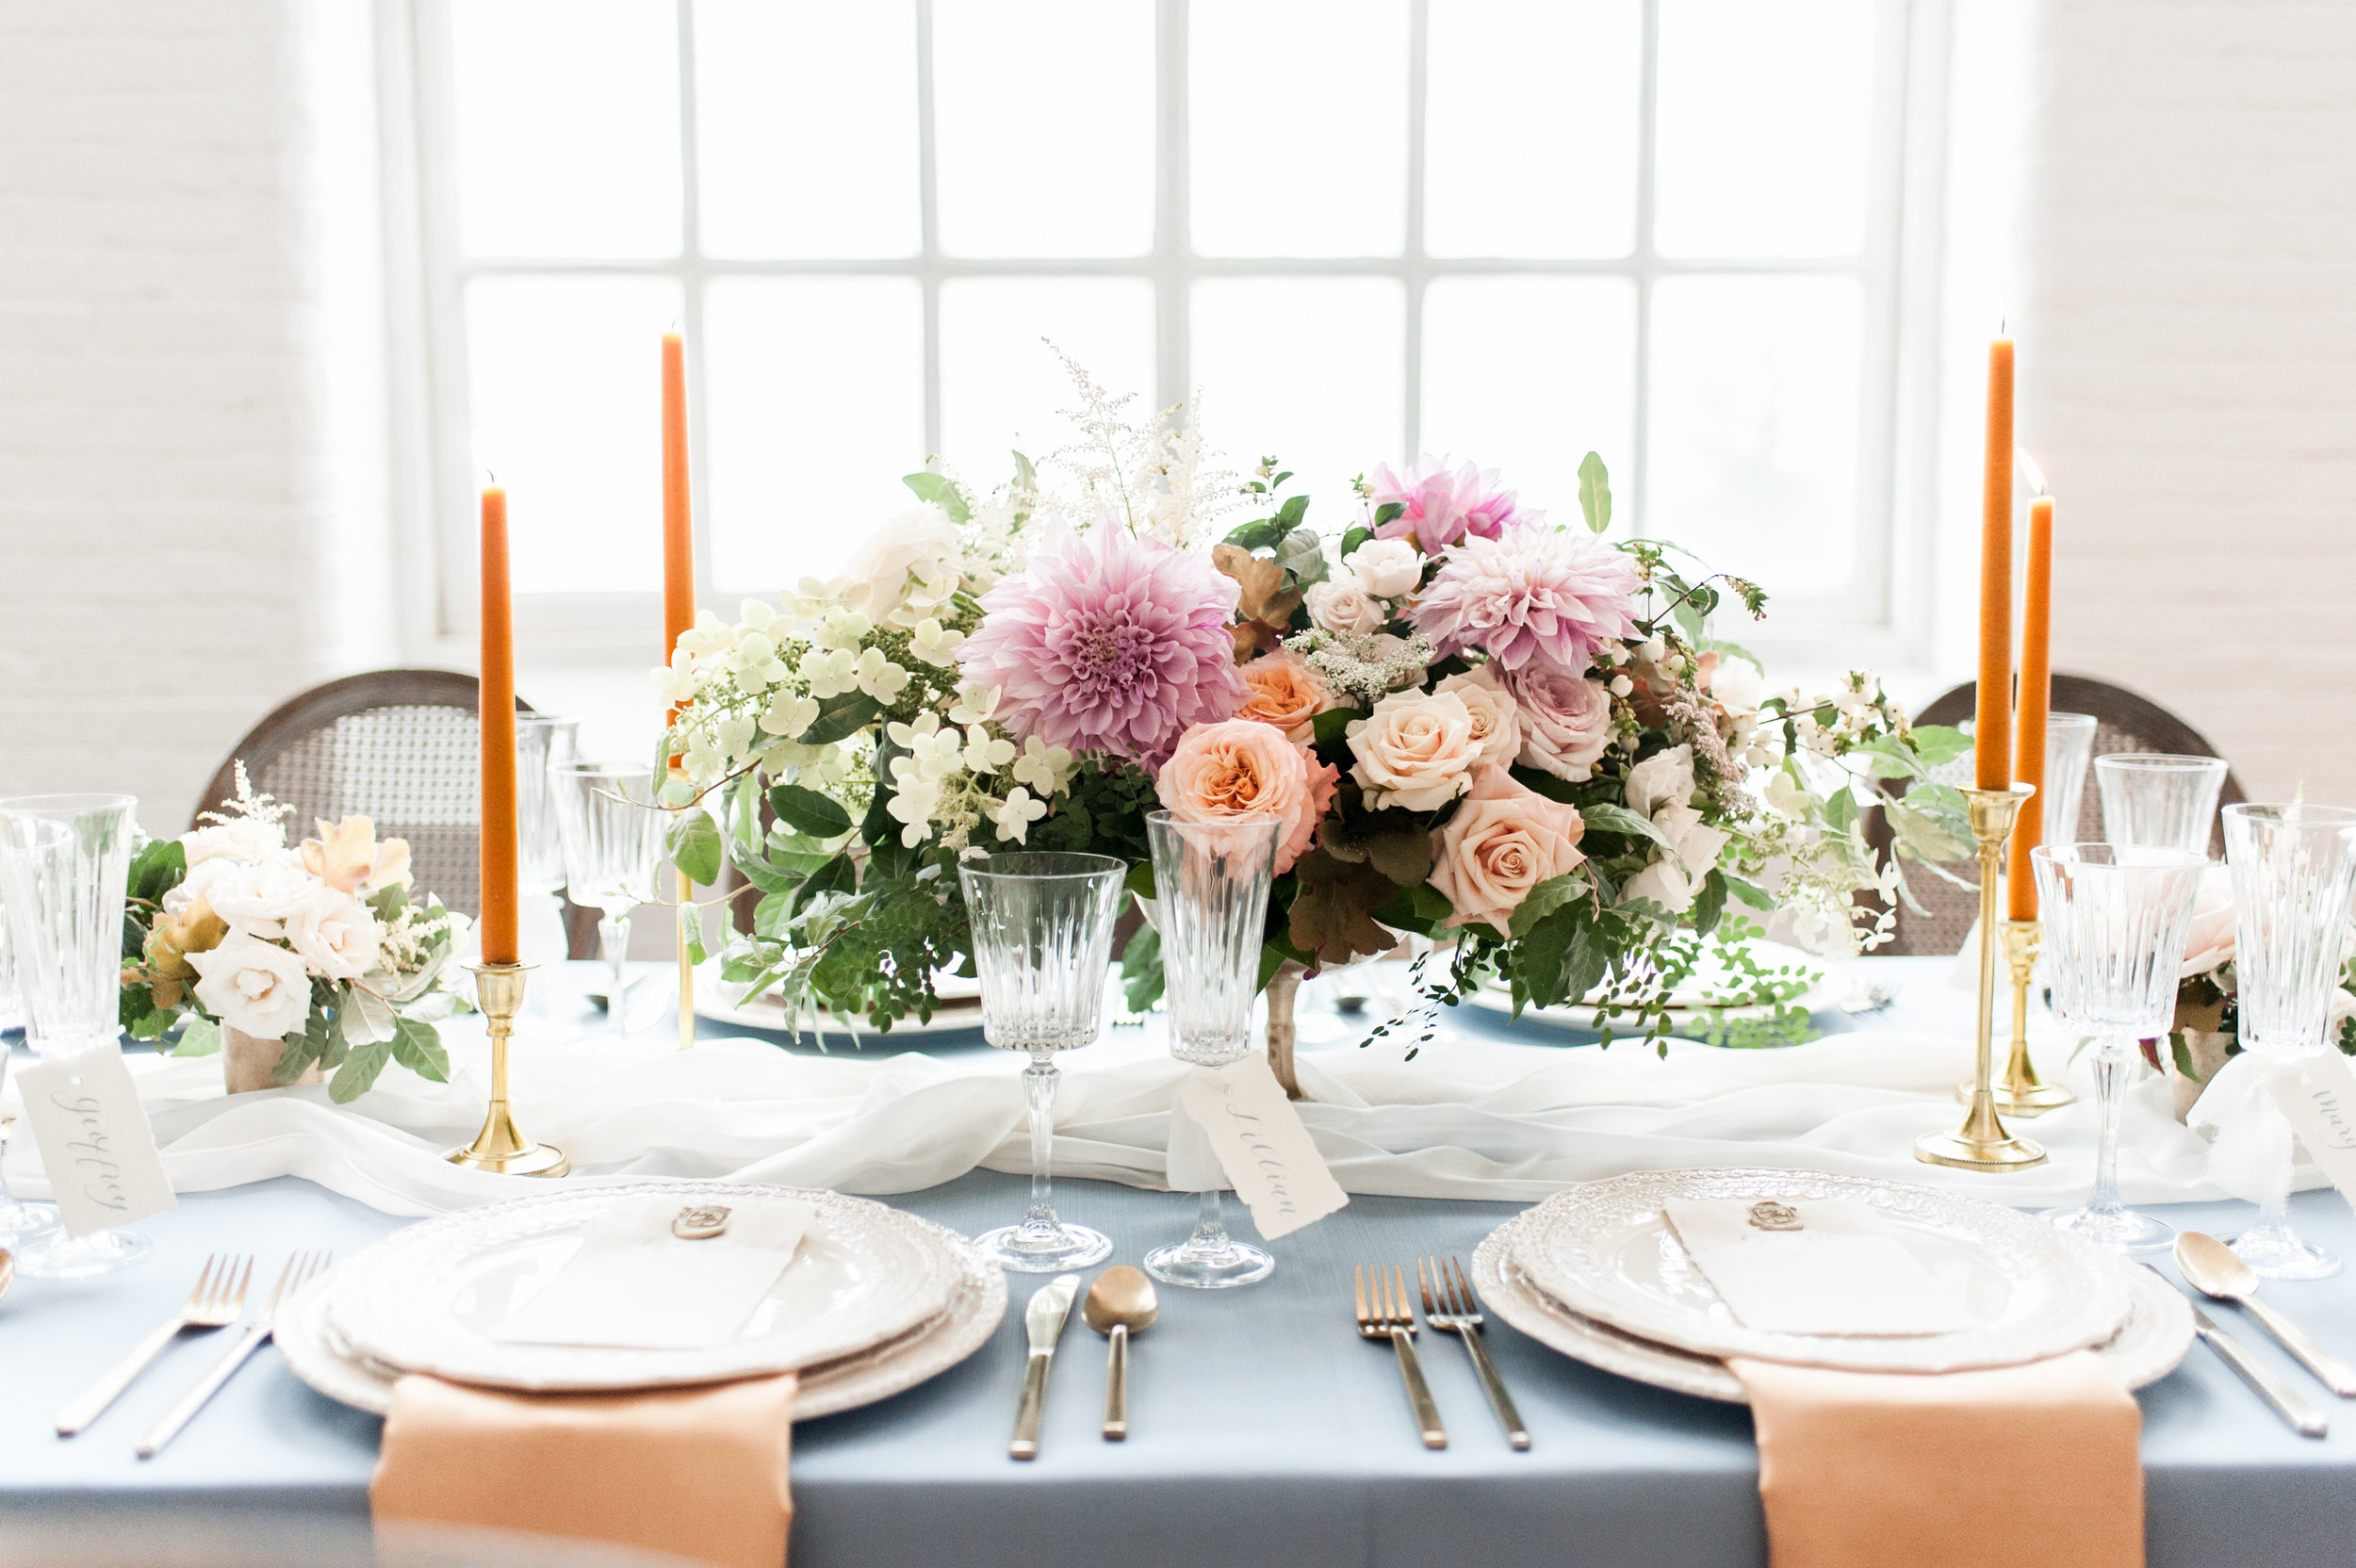  Styling by Urban Soiree Boston, Rentals by PEAK, Linens by BBJ Linen, Florals by Berry Branch Designs 